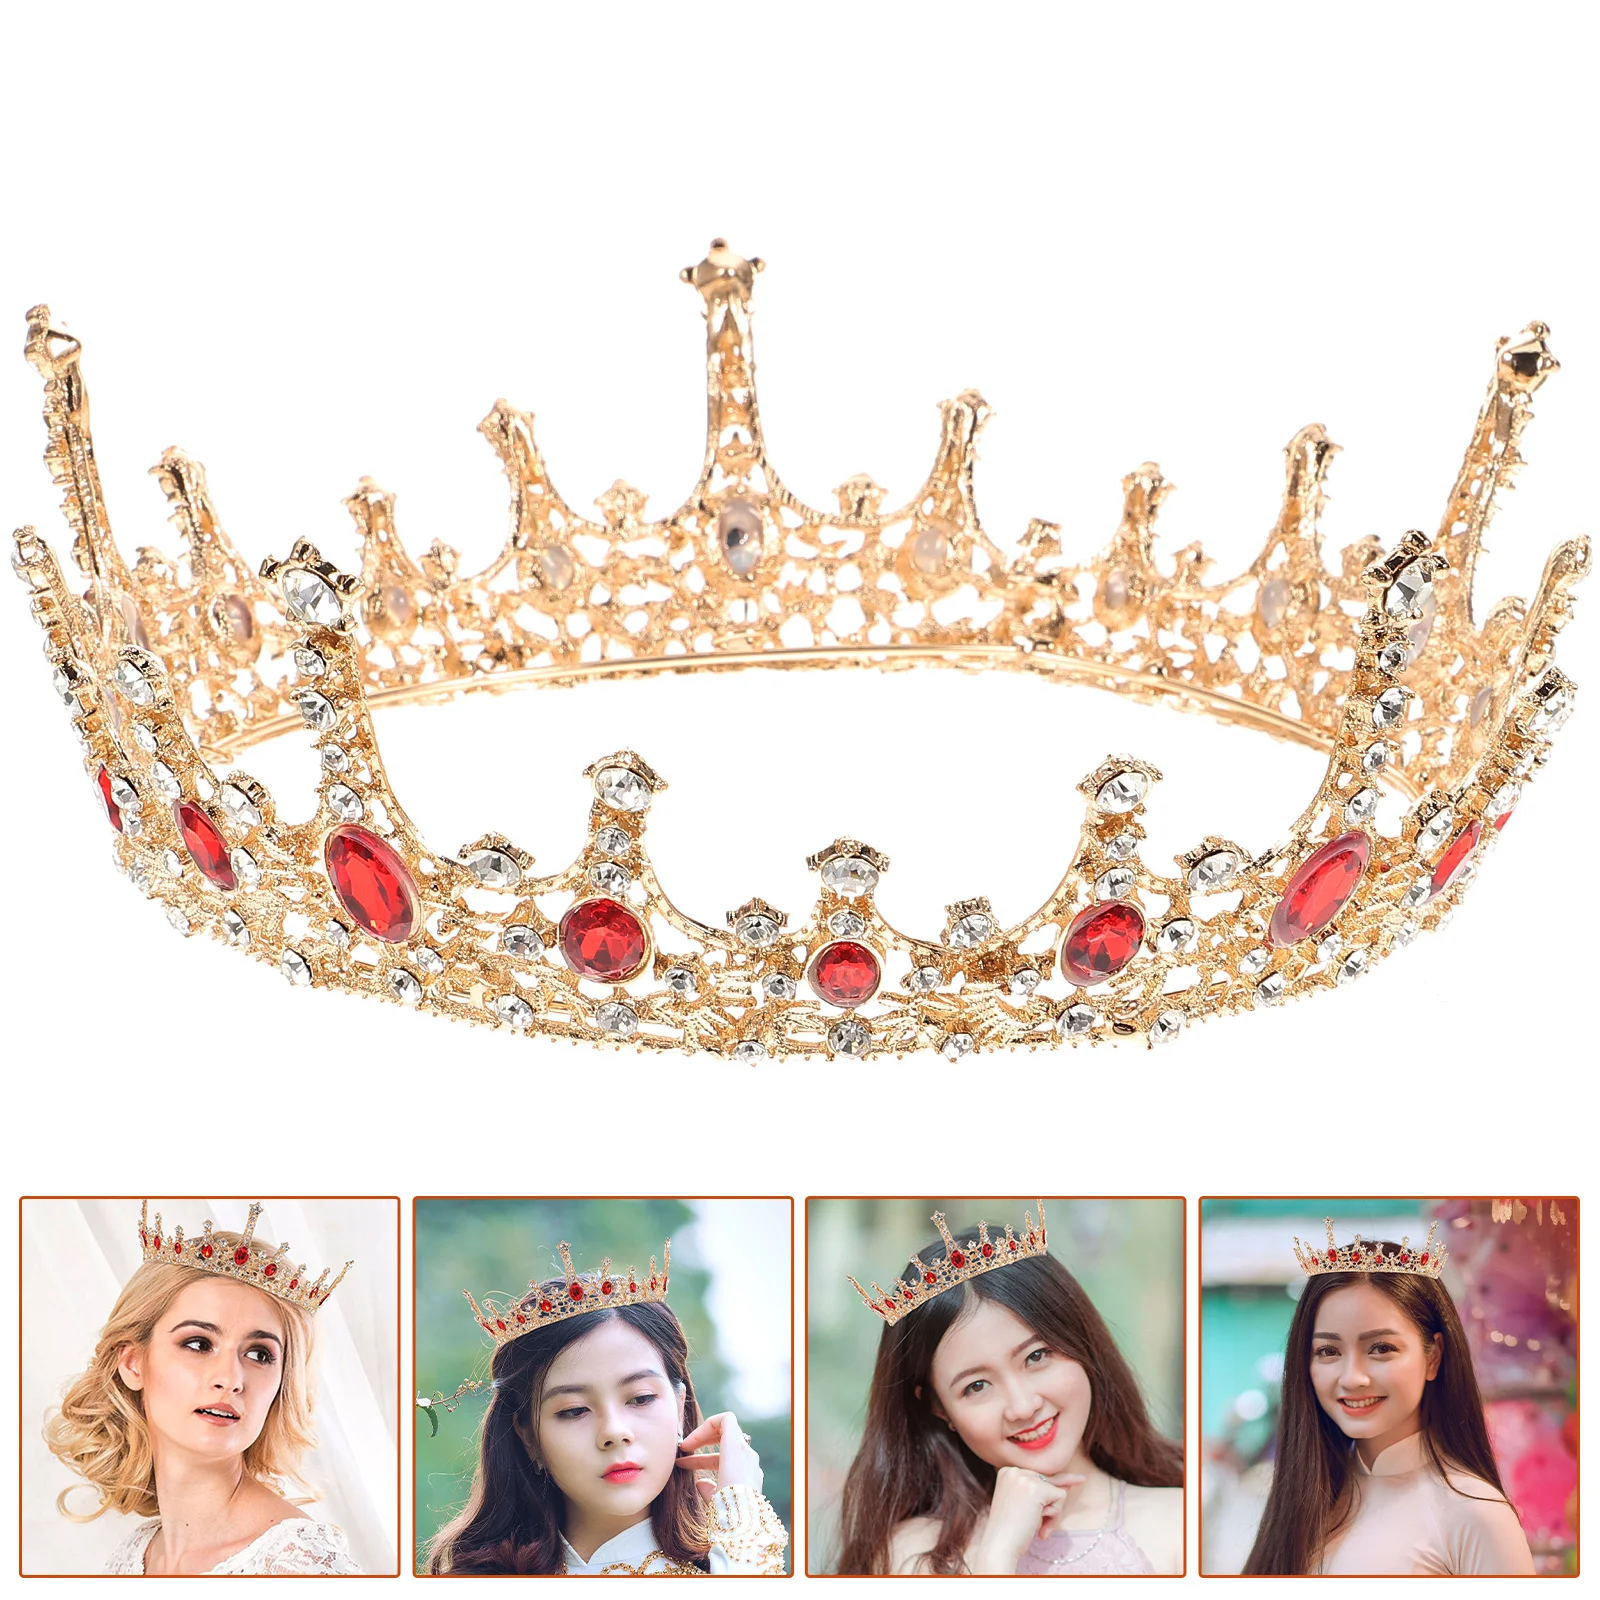 

Rhinestone Bridal Crown Crown and Tiaras Jeweled Baroque Tiara Headband for Wedding Prom Party ( Red )